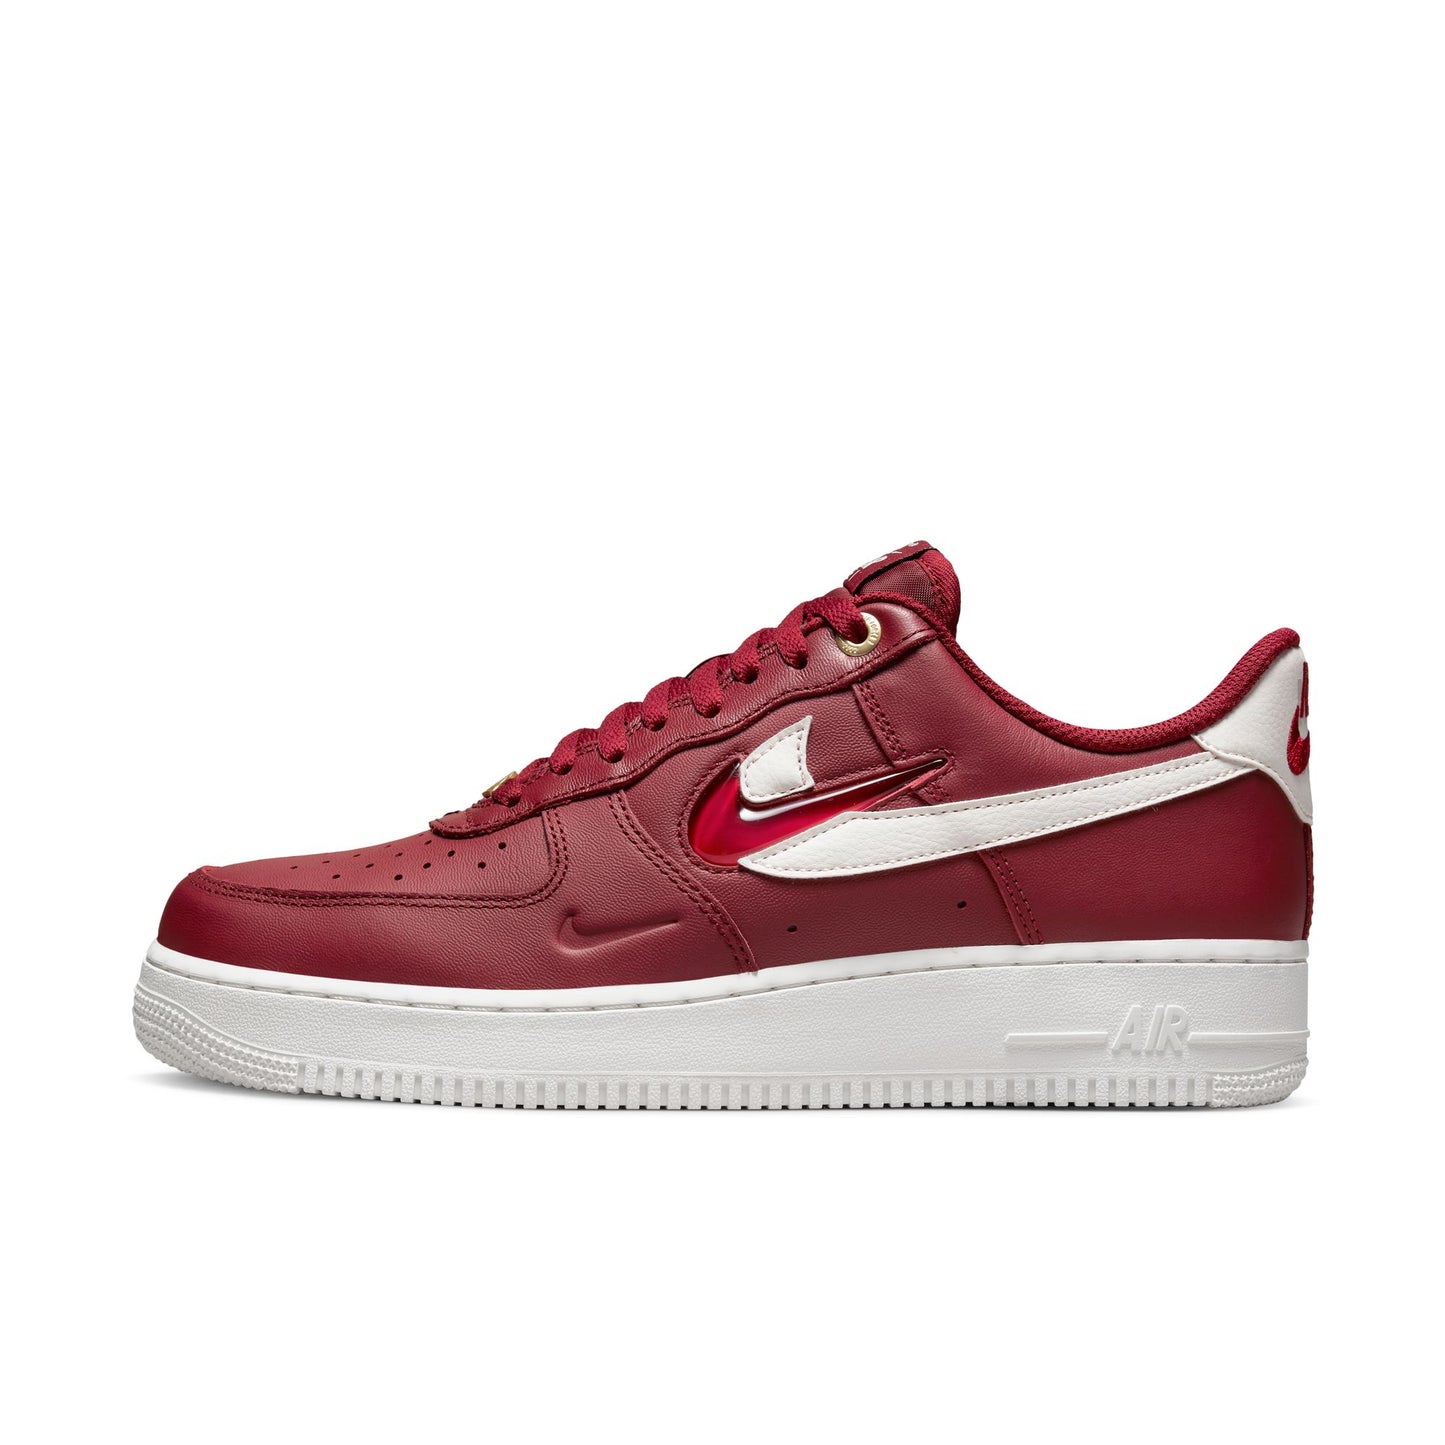 Air Force 1 '07 PRM – Laced.